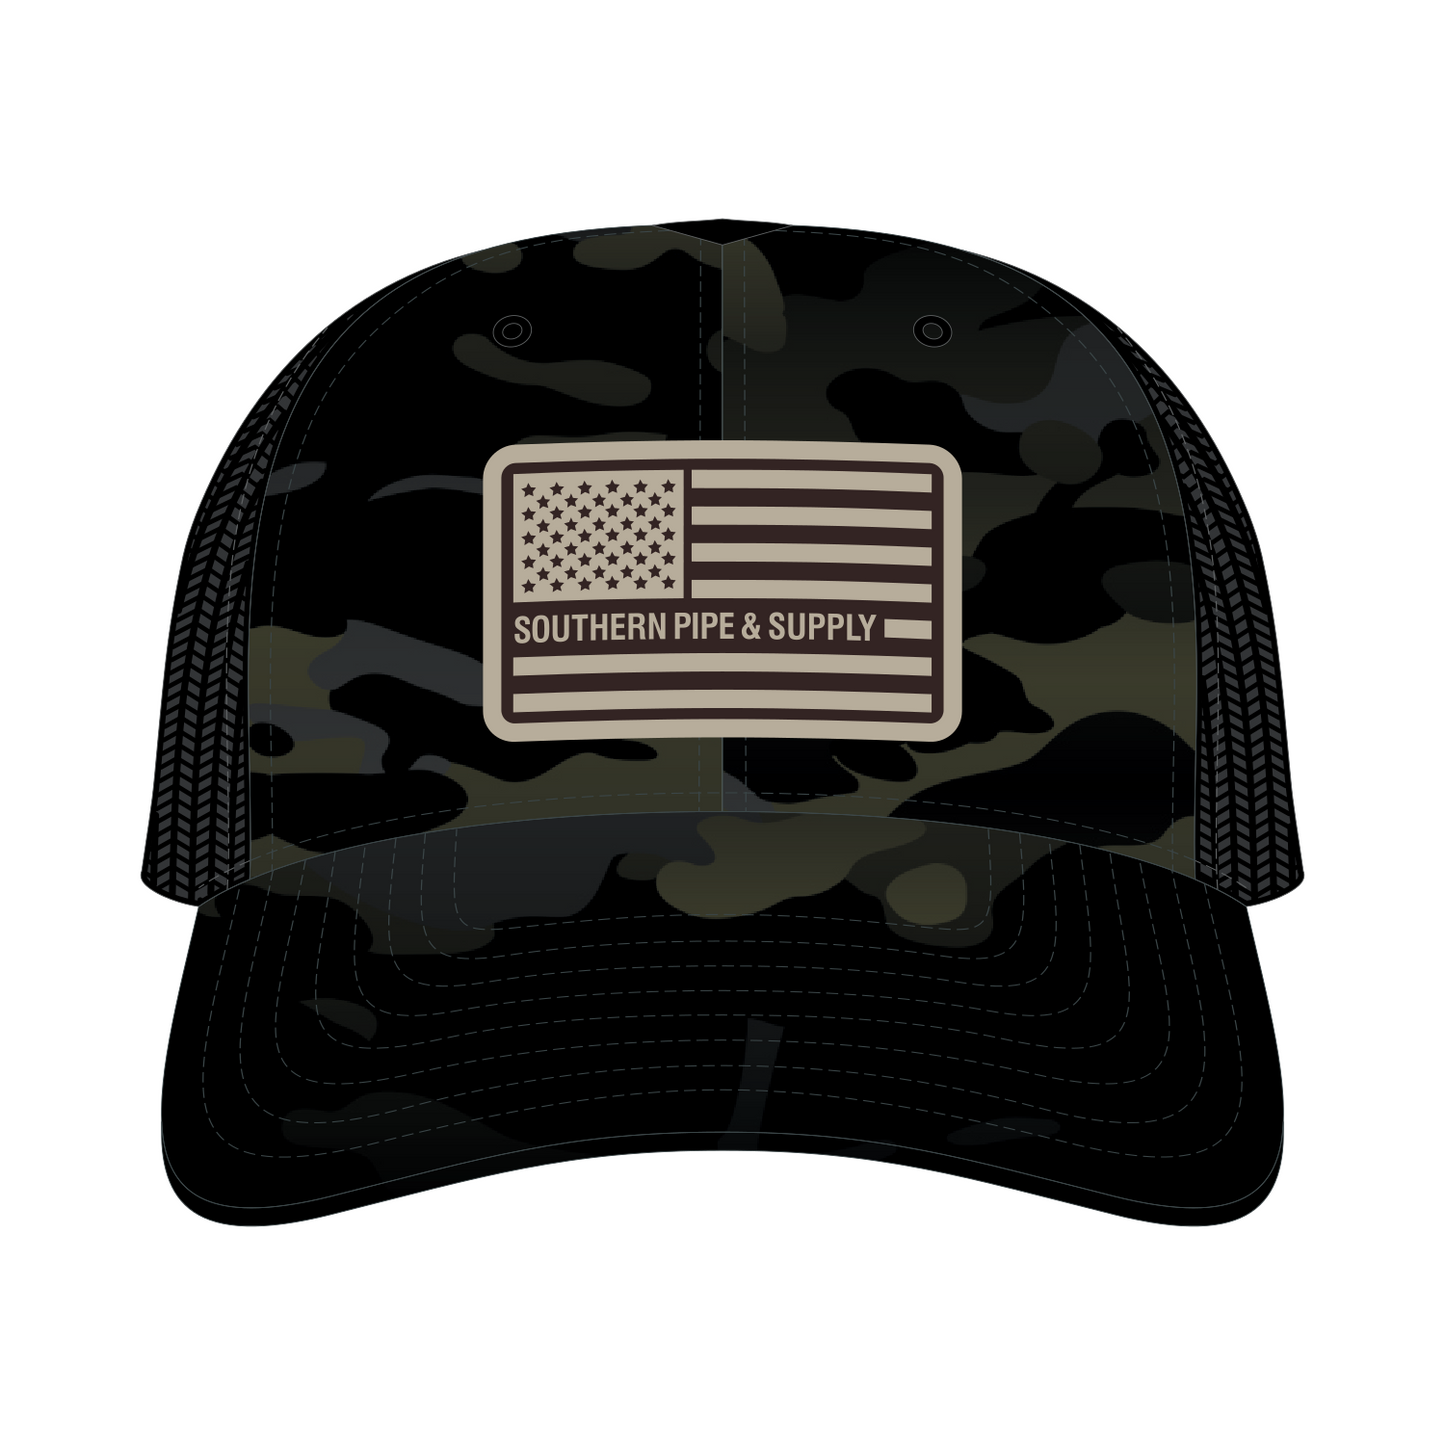 Richardson Multicam Trucker Cap With Embroidered Patch